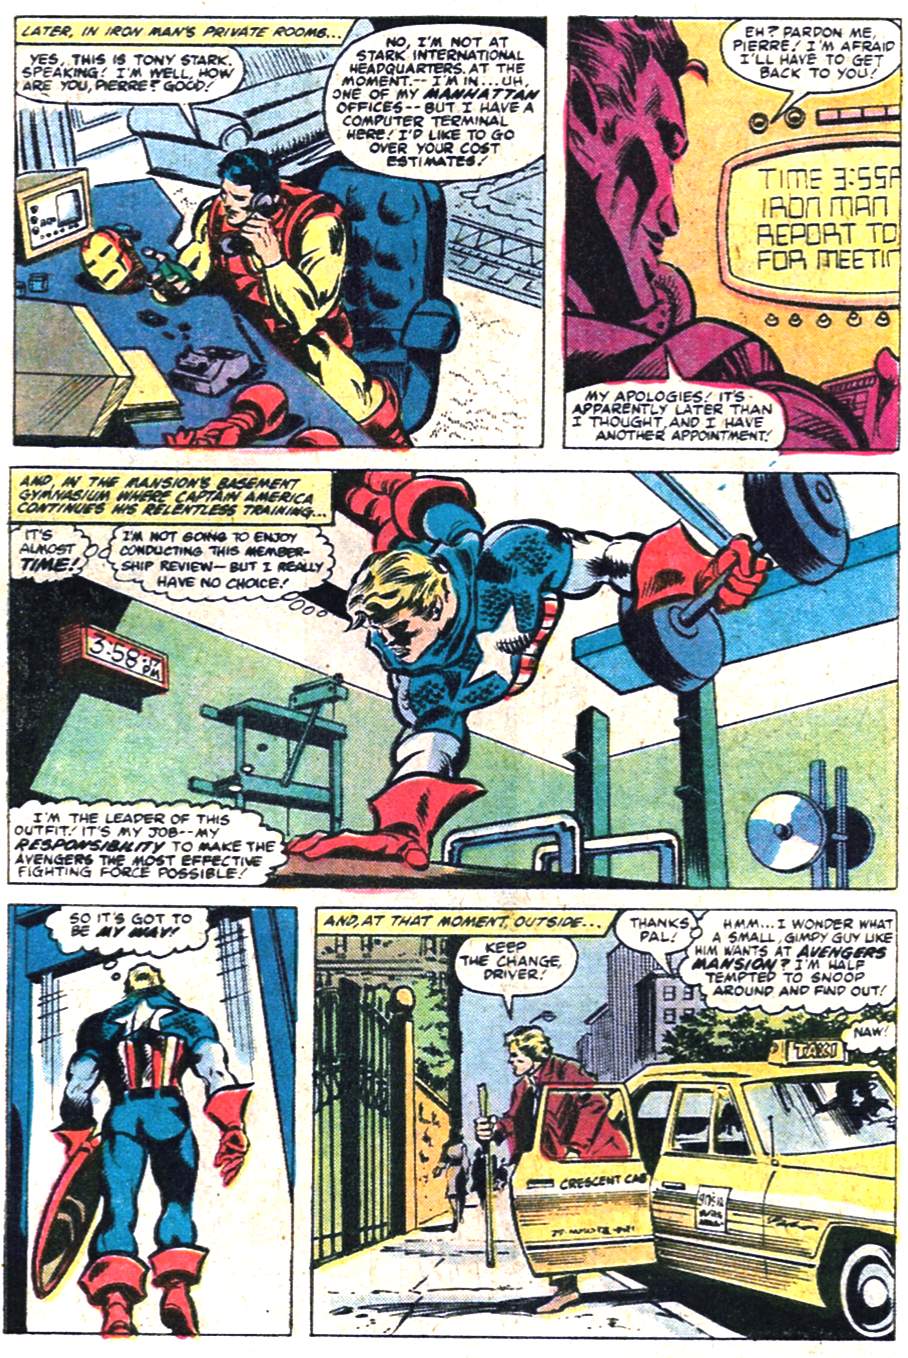 The Avengers (1963) 211 Page 6